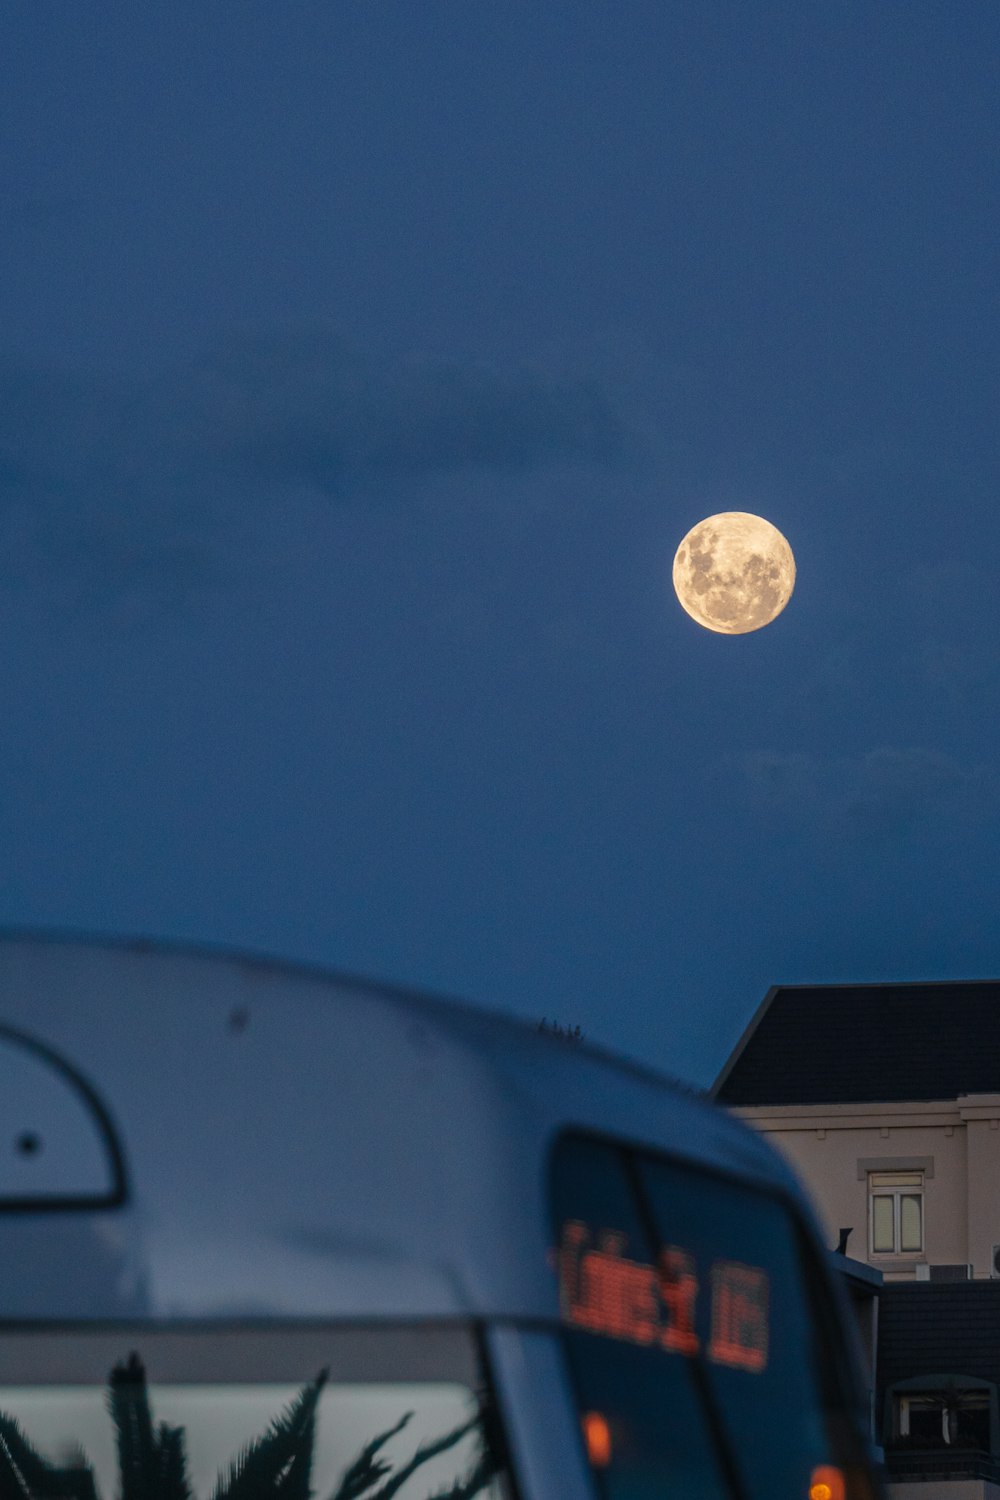 a bus is parked in front of a building with a full moon in the sky